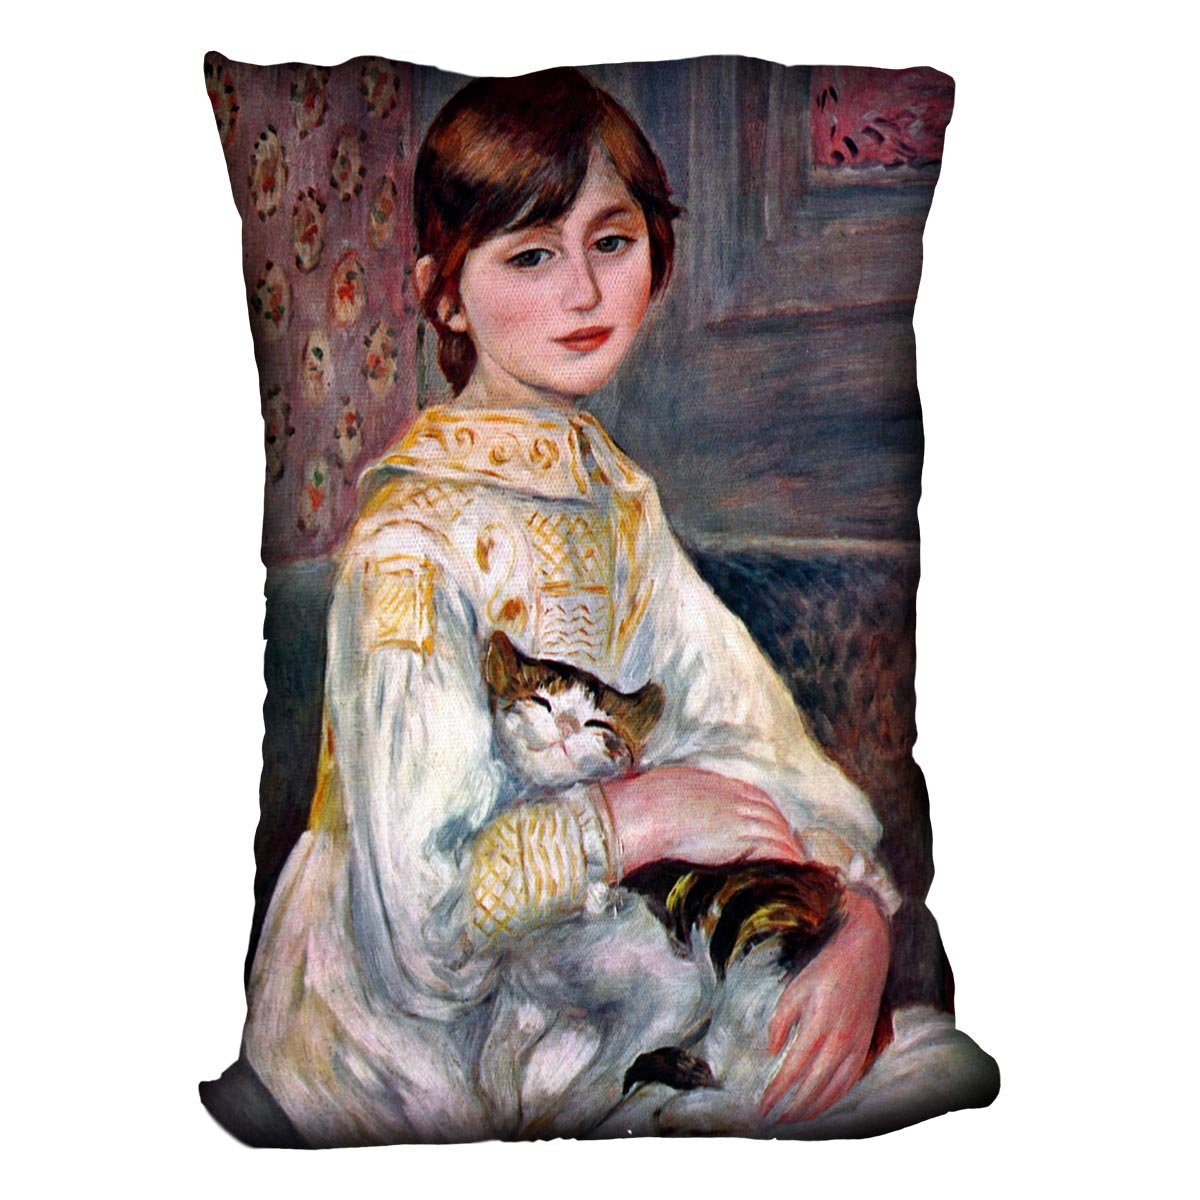 Portrait of Mademoiselle Julie Manet by Renoir Throw Pillow